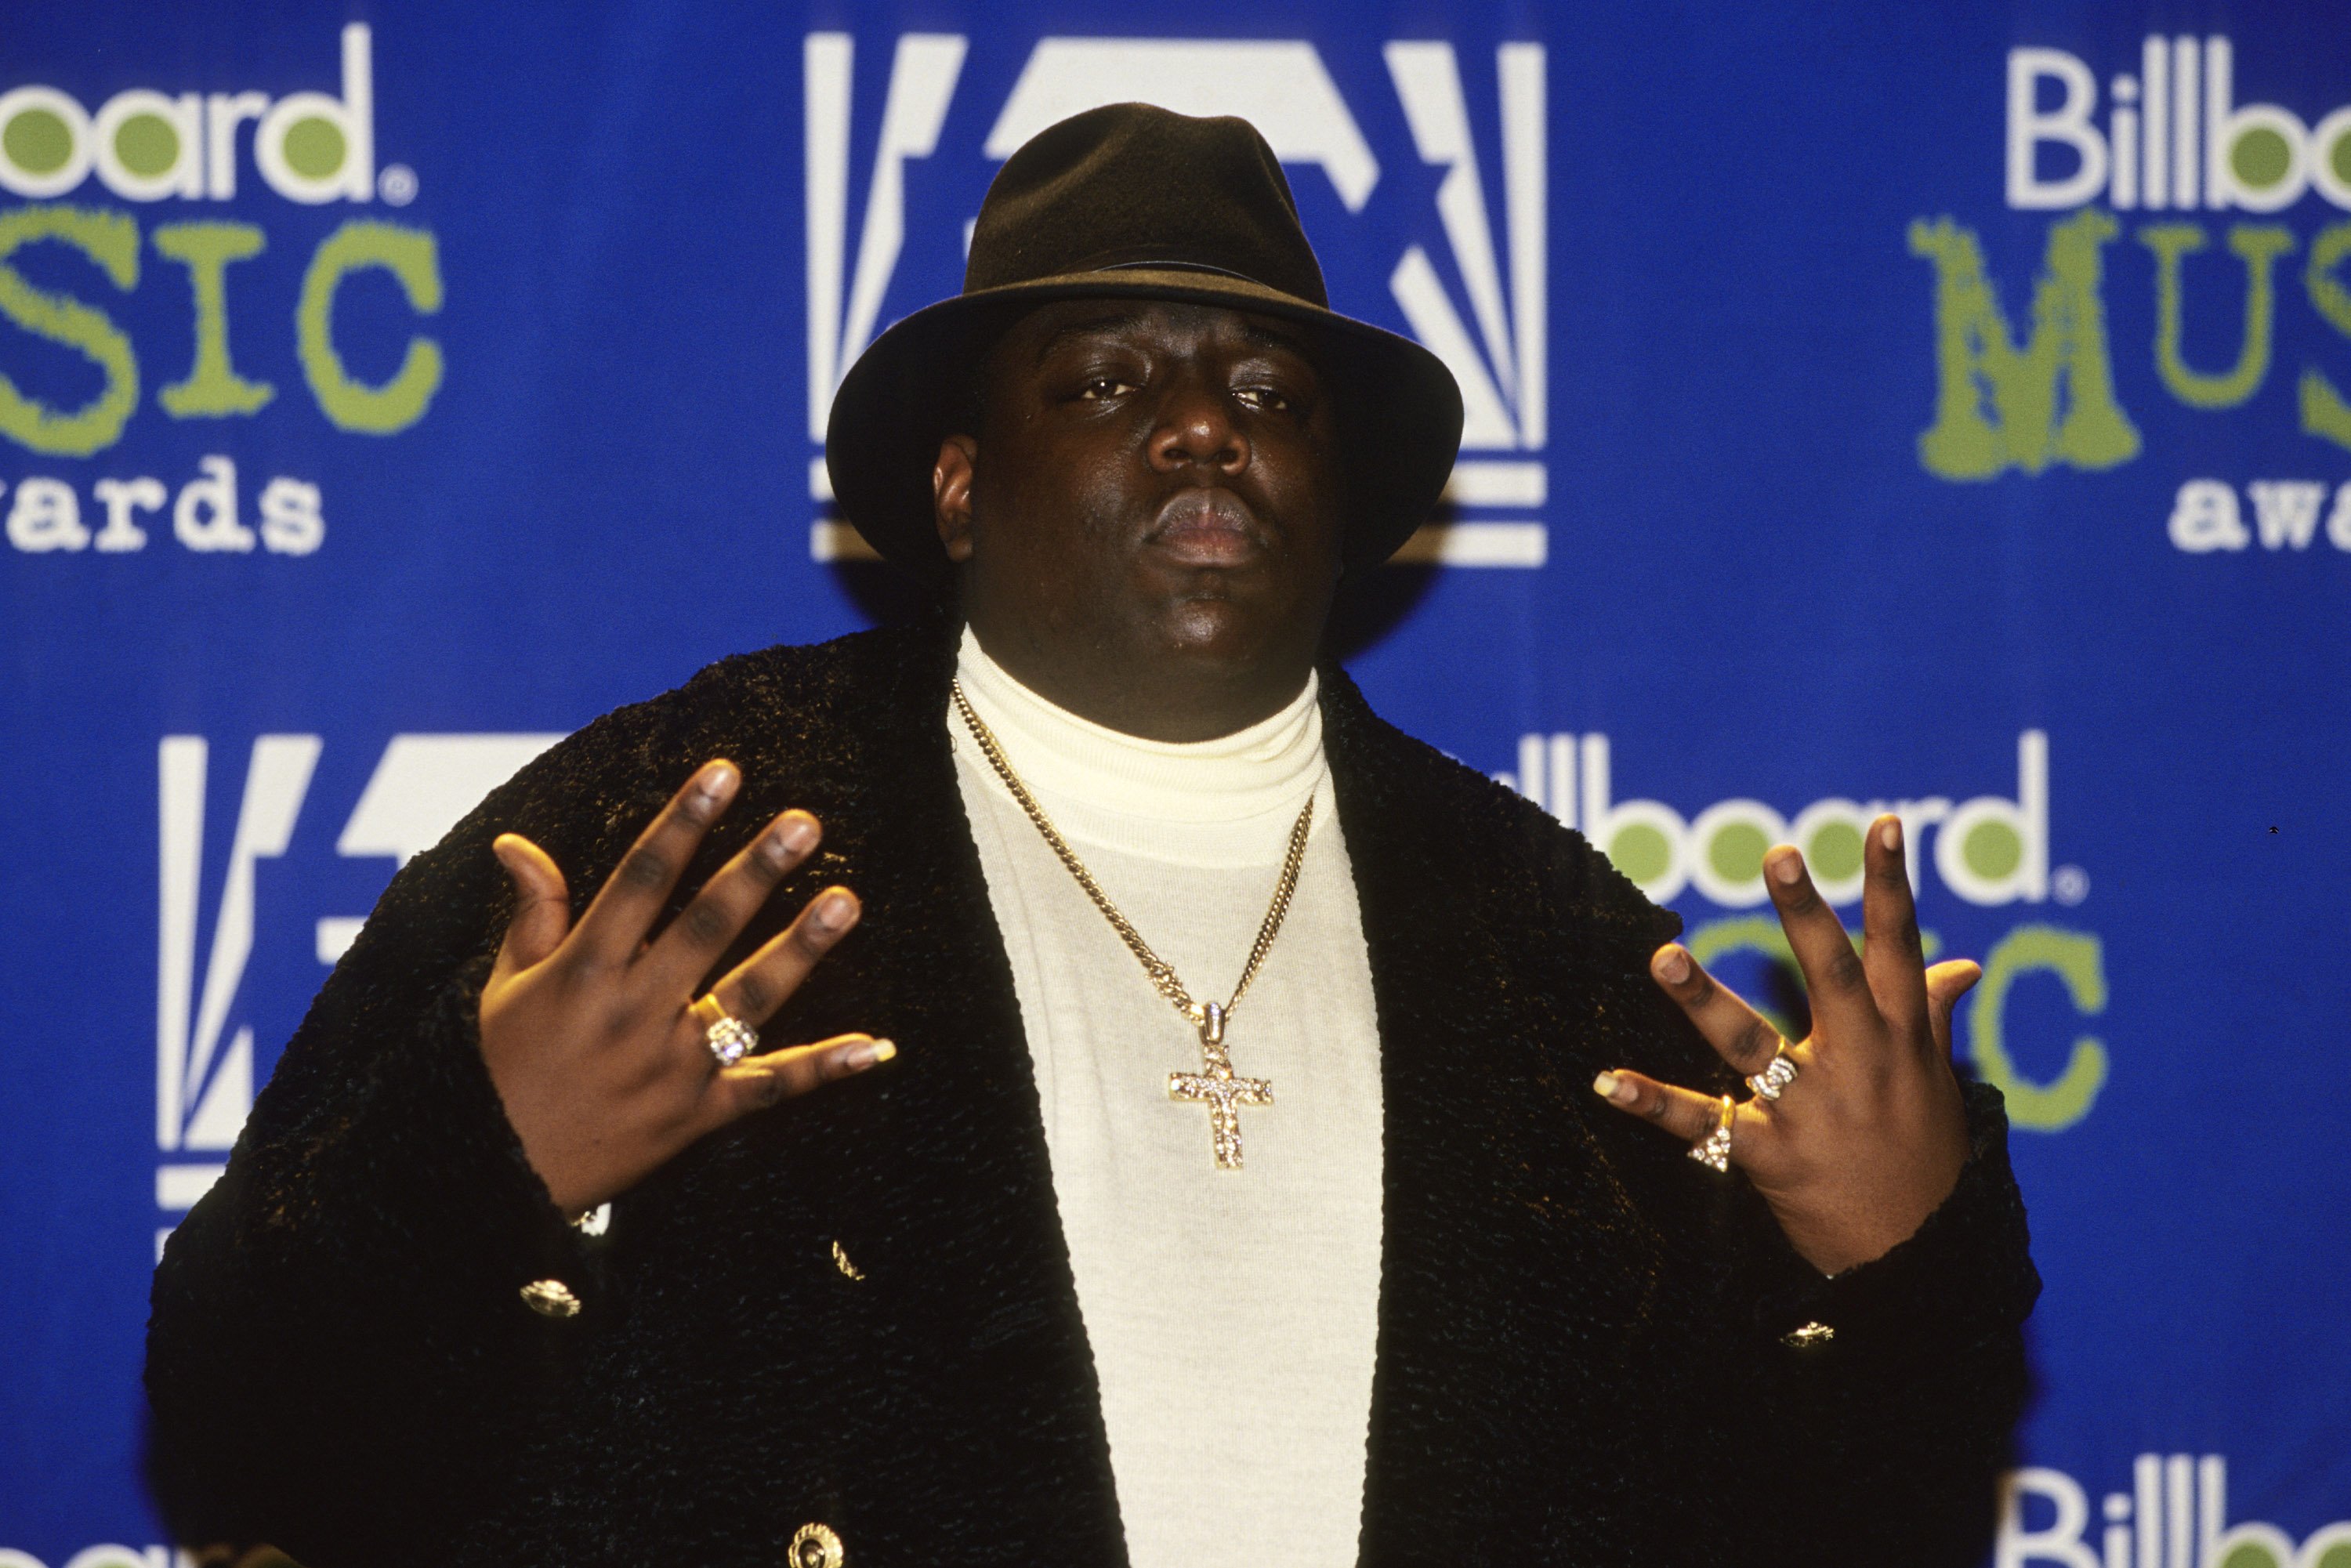 Rapper Notorious BIG attends the 1995 Billboard Music Awards, New York, December 6, 1995. | Source: Getty Images